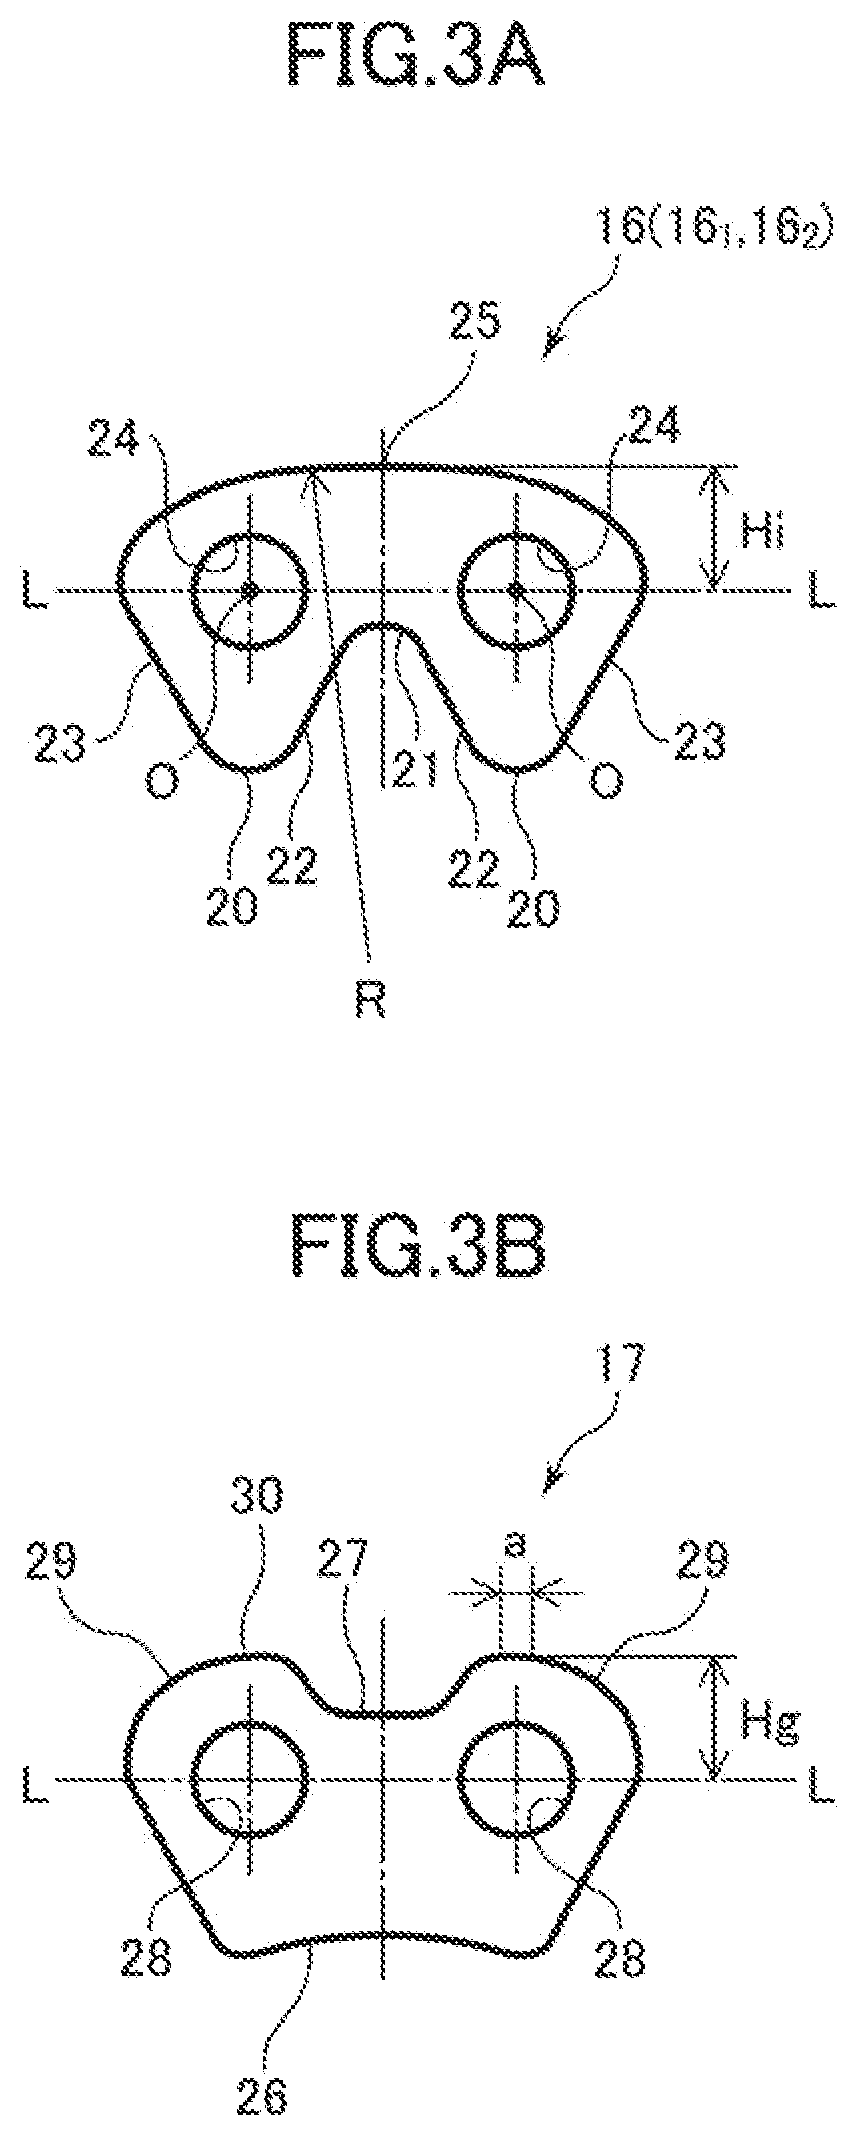 Chain transmission device